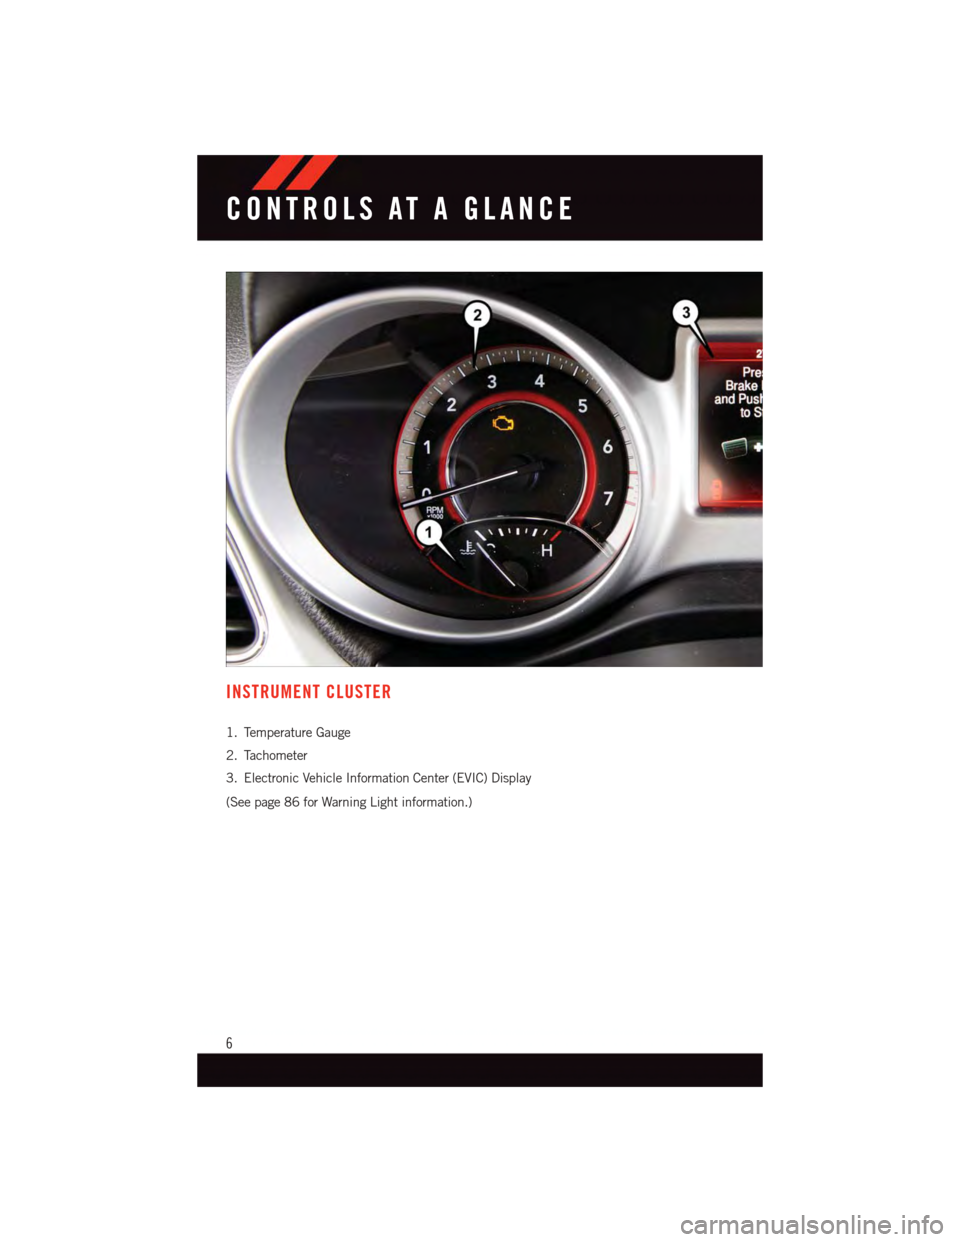 DODGE JOURNEY 2015 1.G User Guide INSTRUMENT CLUSTER
1. Temperature Gauge
2. Tachometer
3. Electronic Vehicle Information Center (EVIC) Display
(See page 86 for Warning Light information.)
CONTROLS AT A GLANCE
6 